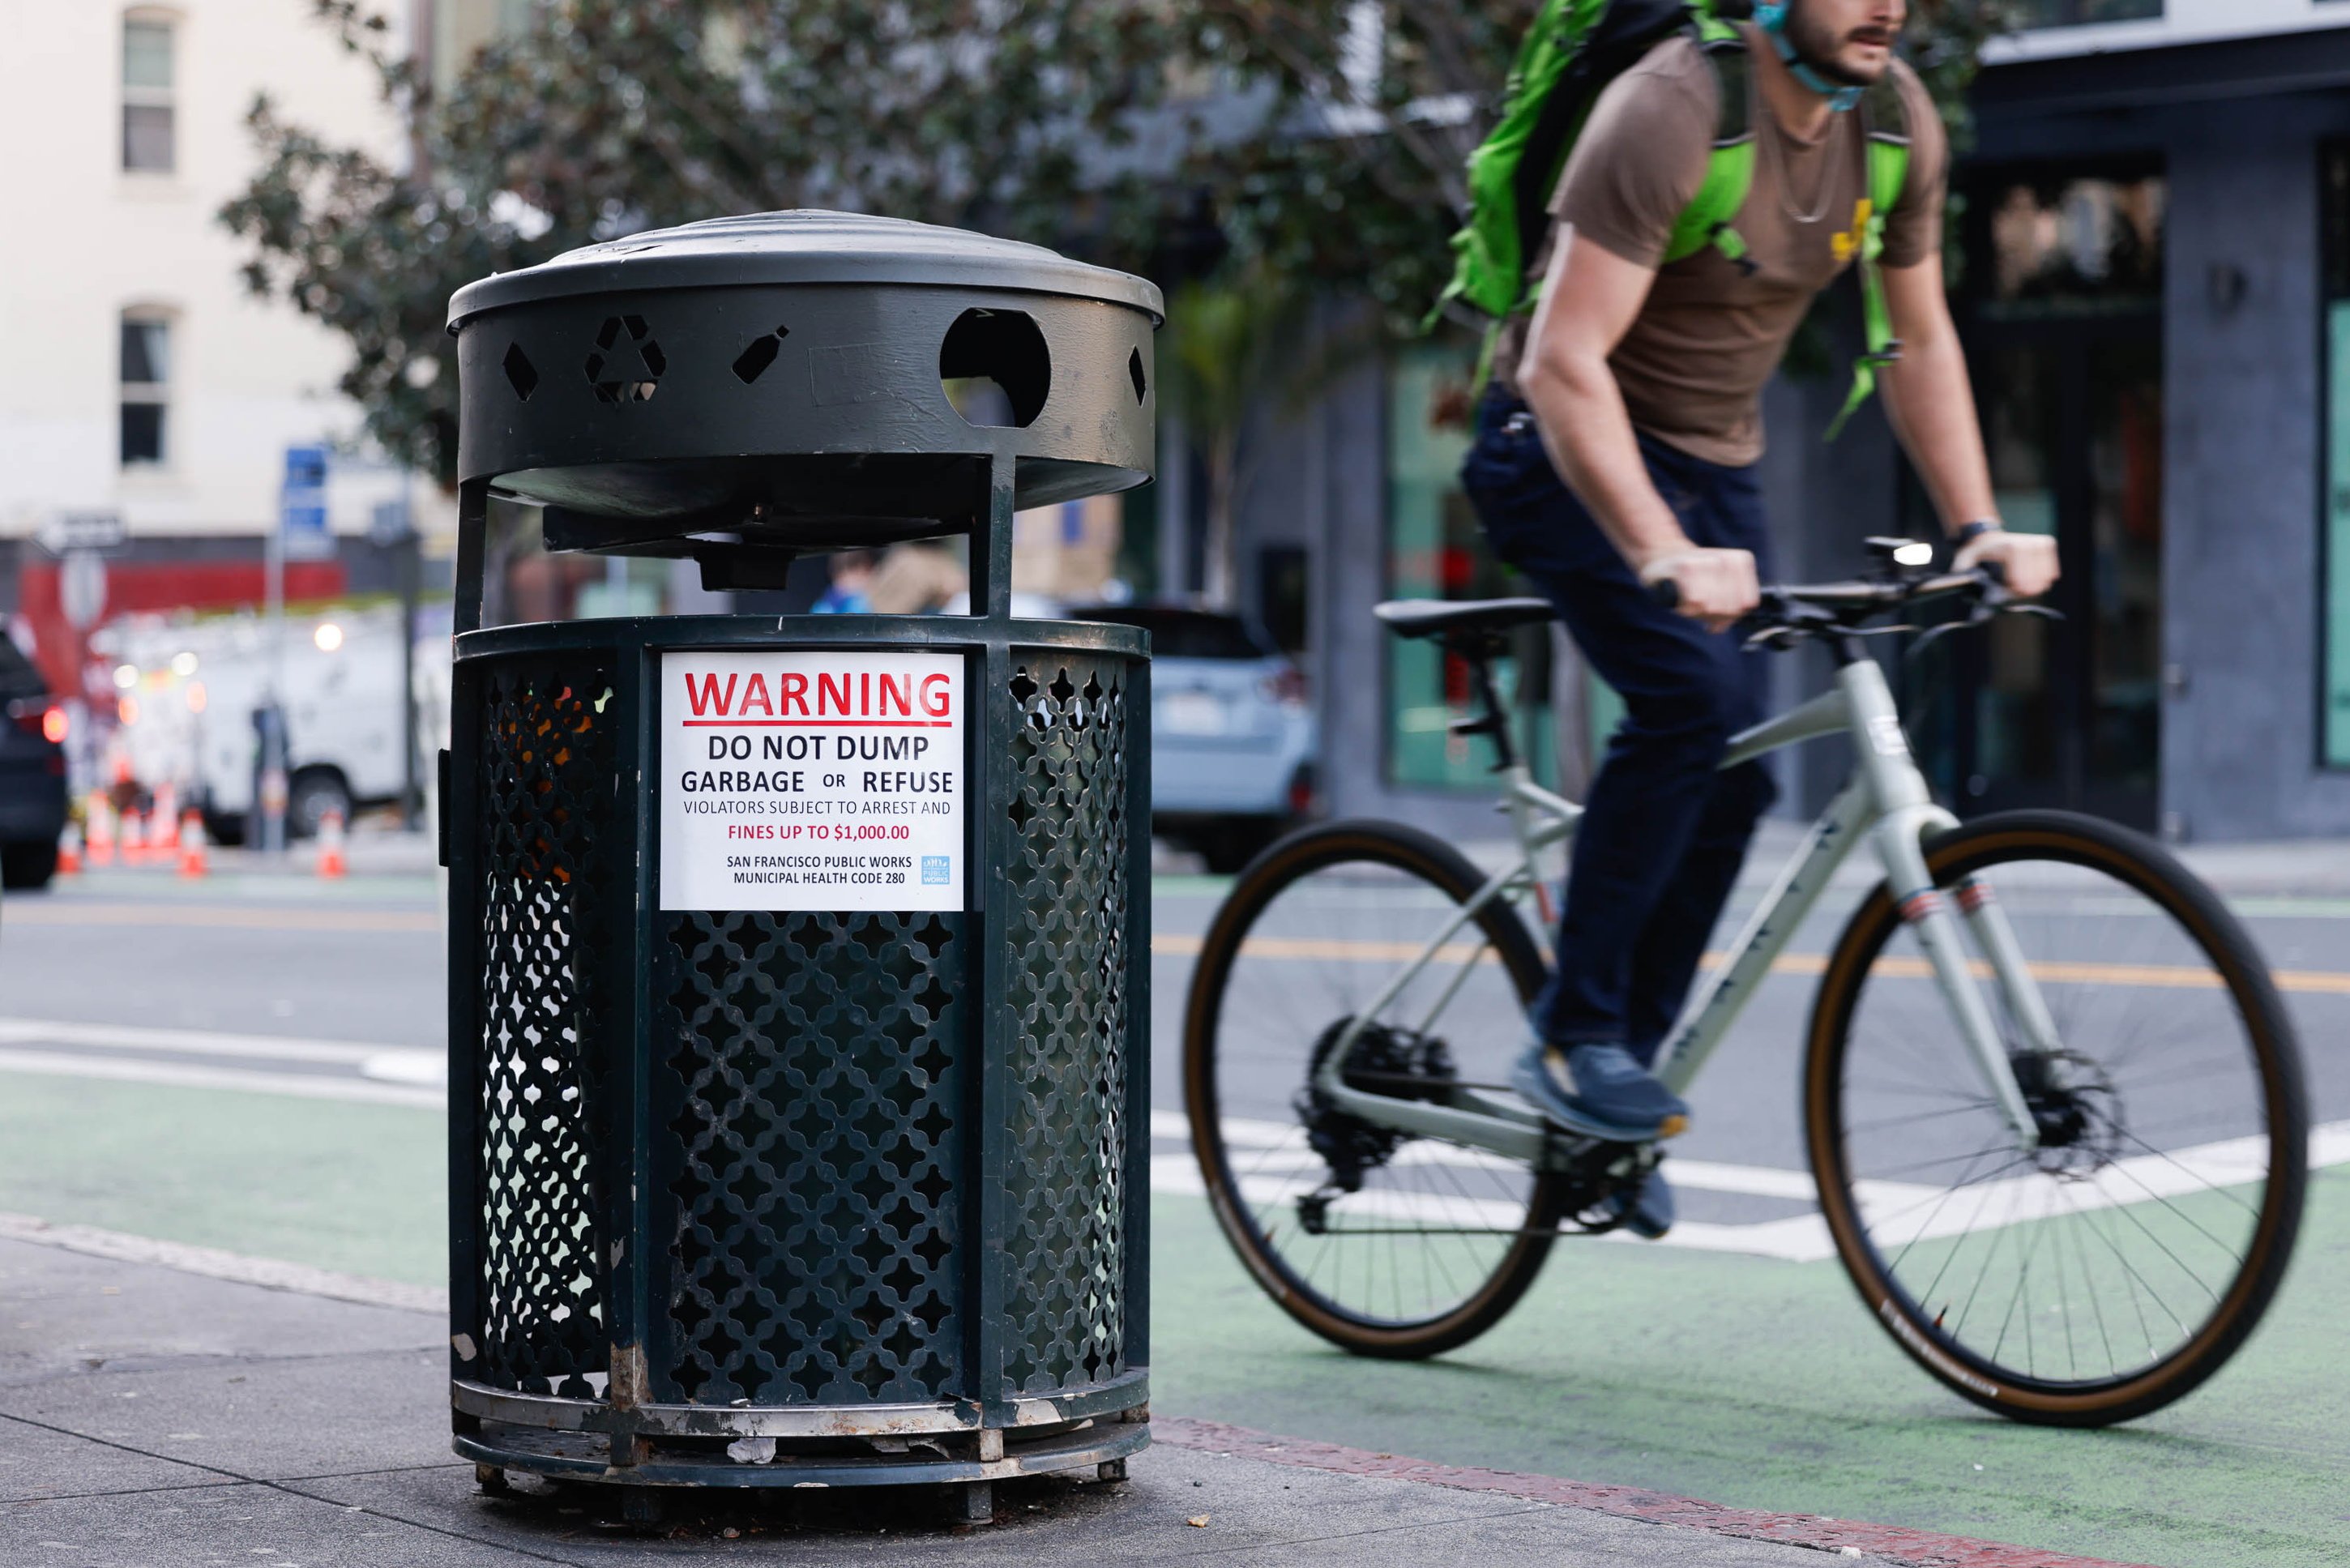 A bicyclist rides by a trash can marked with a sign that reads: "Warning: Do not dump garbage or refuse."